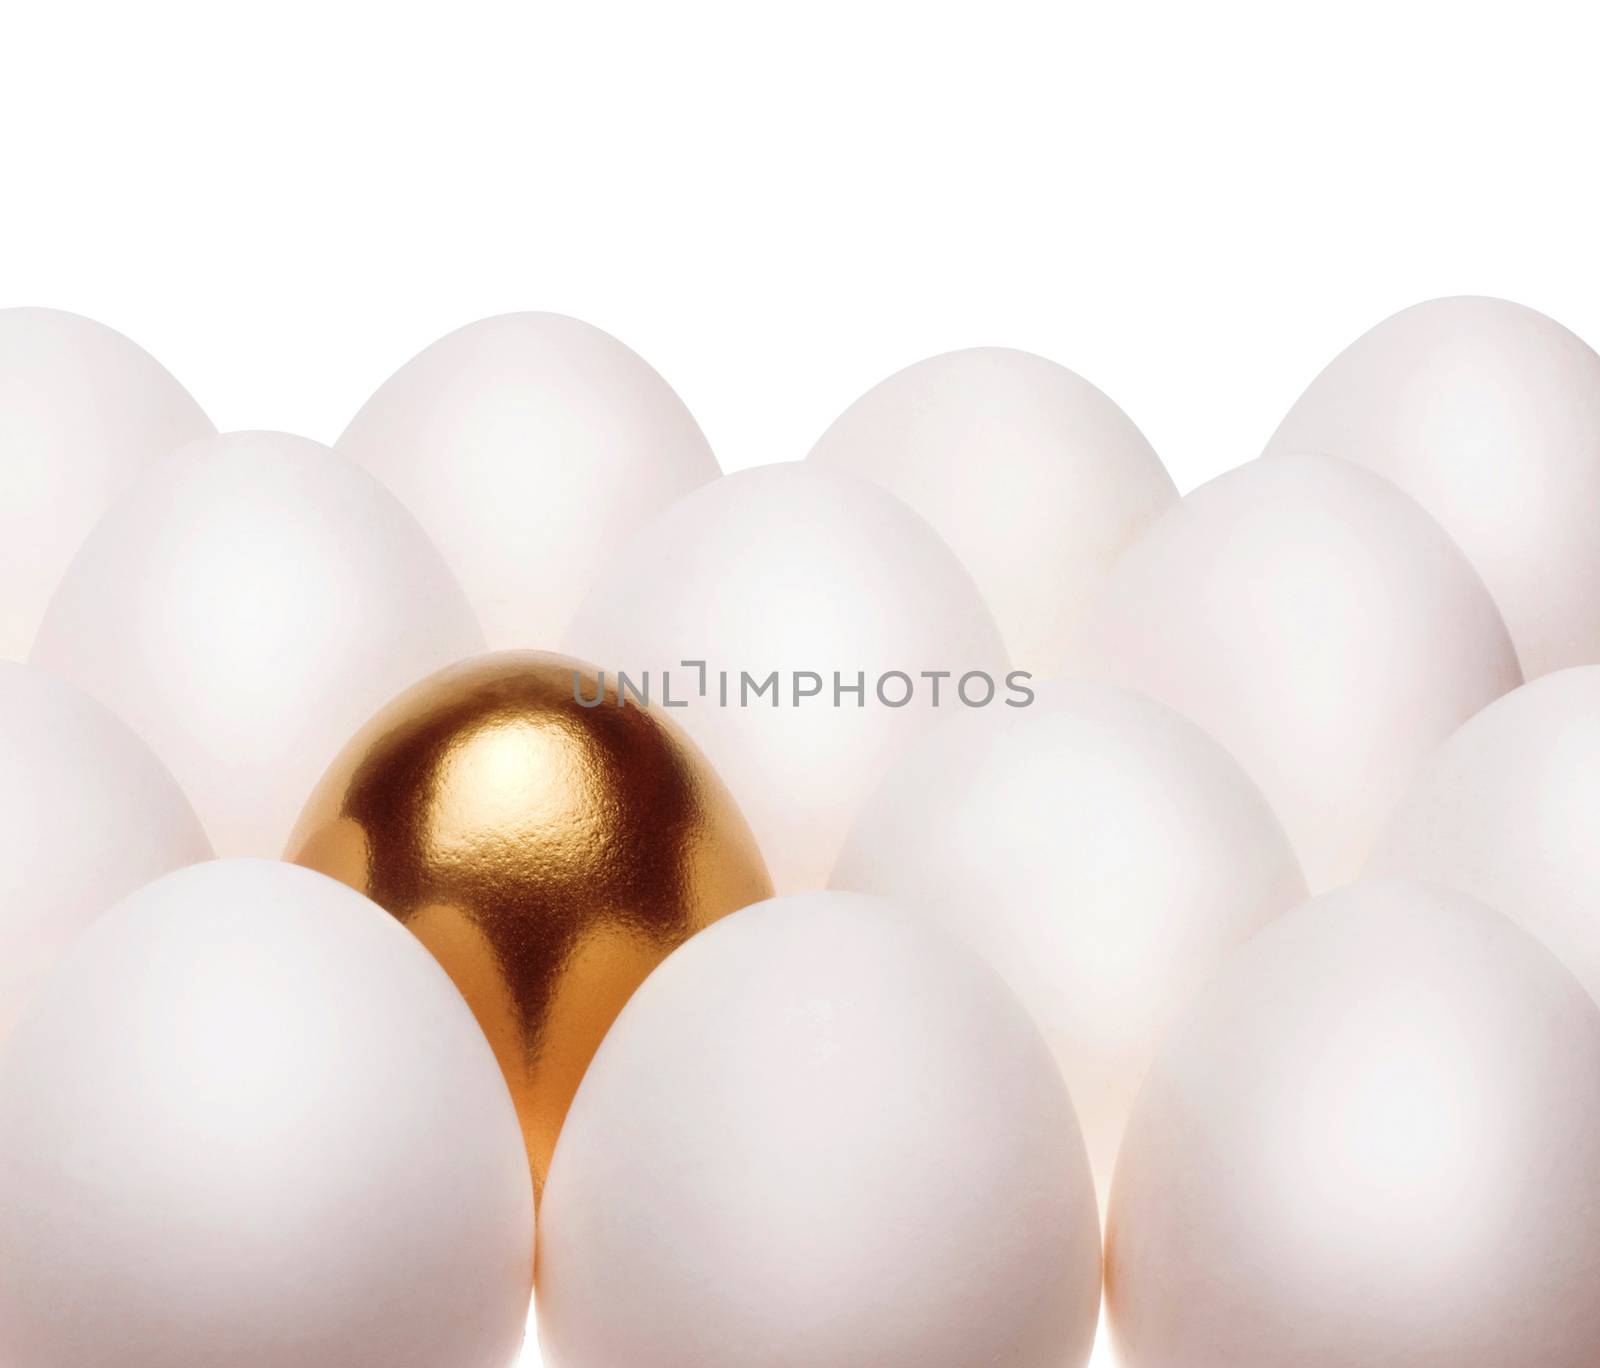 one gold egg lays among common white eggs by ozaiachin